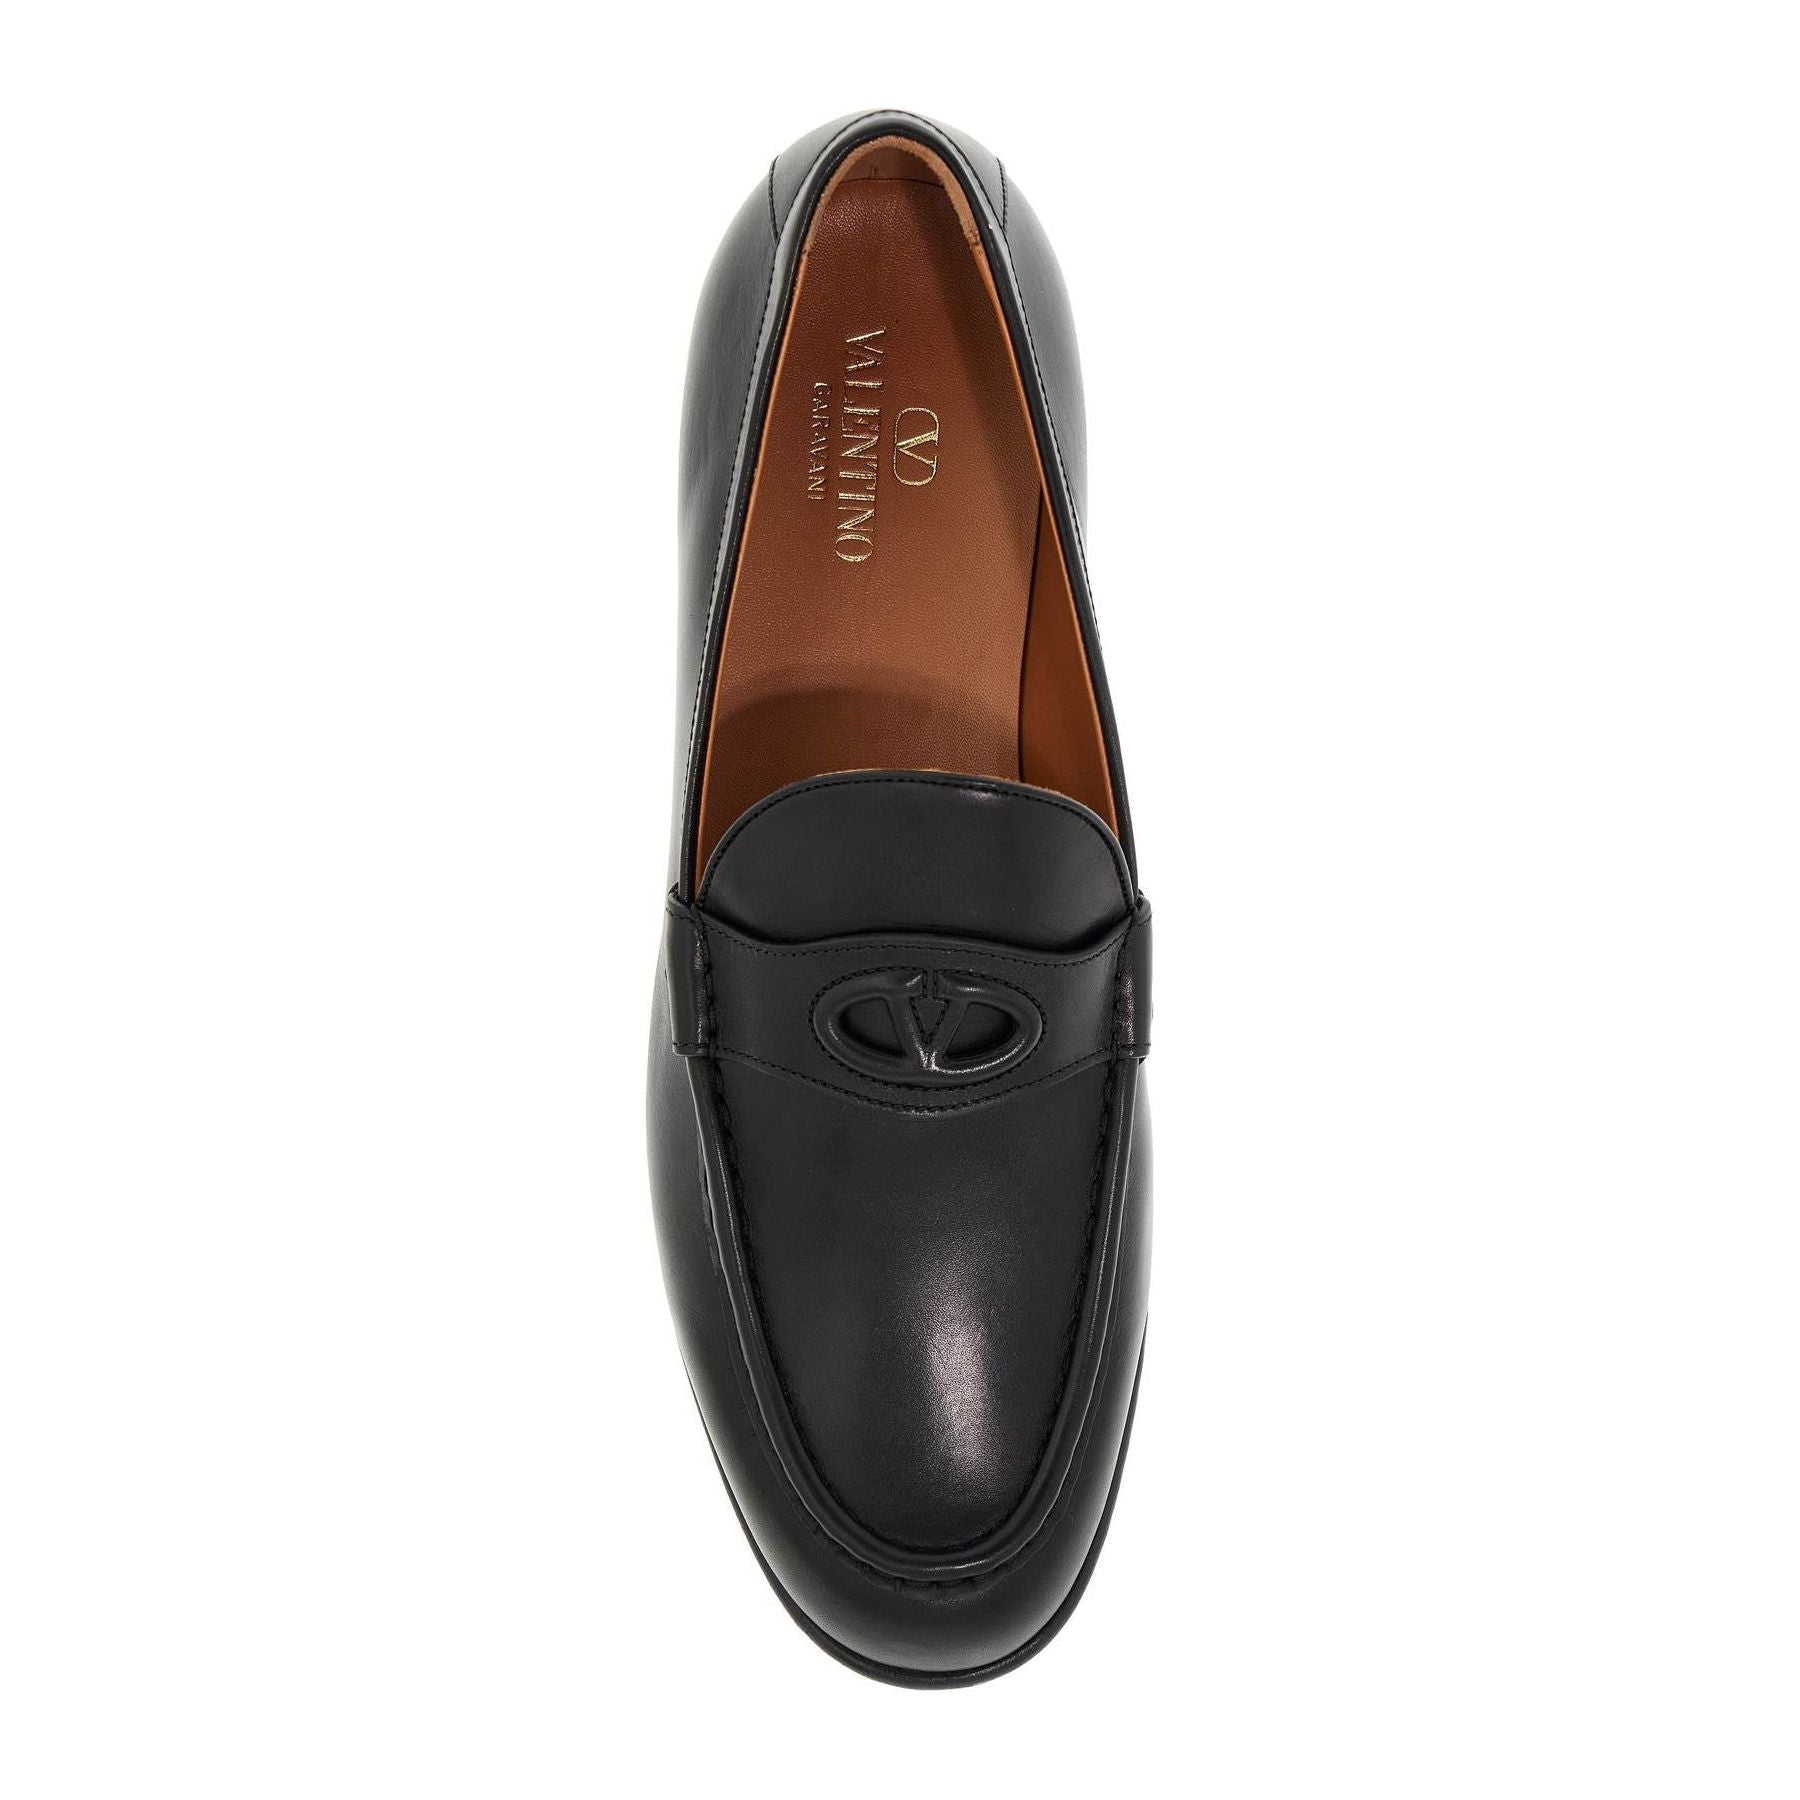 Signature VLogo Leather Loafers